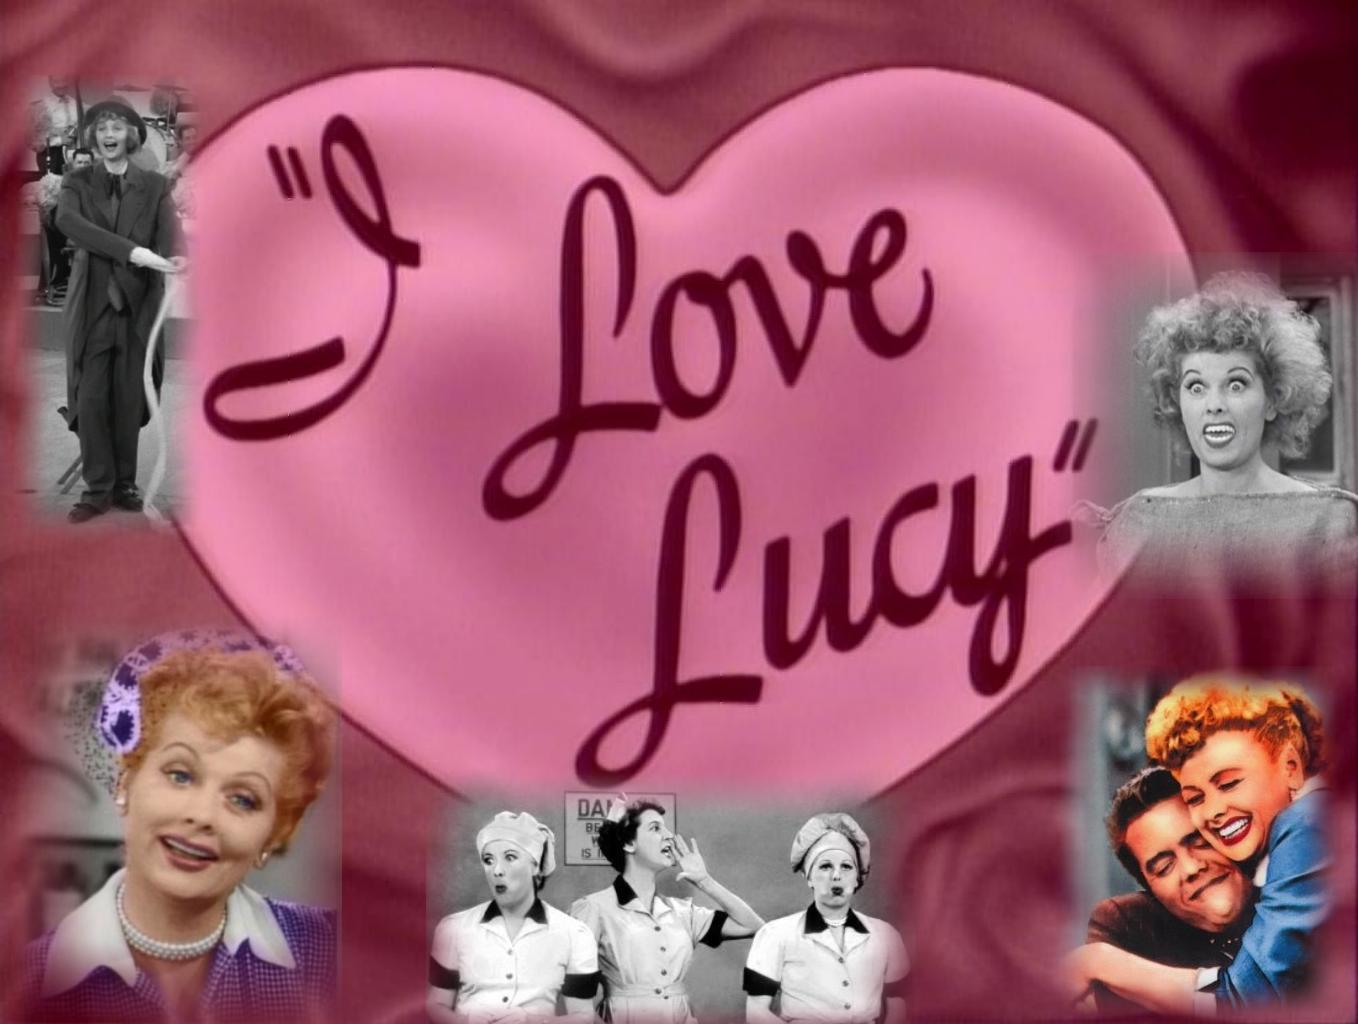 I Love Lucy Wallpaper Screensavers On